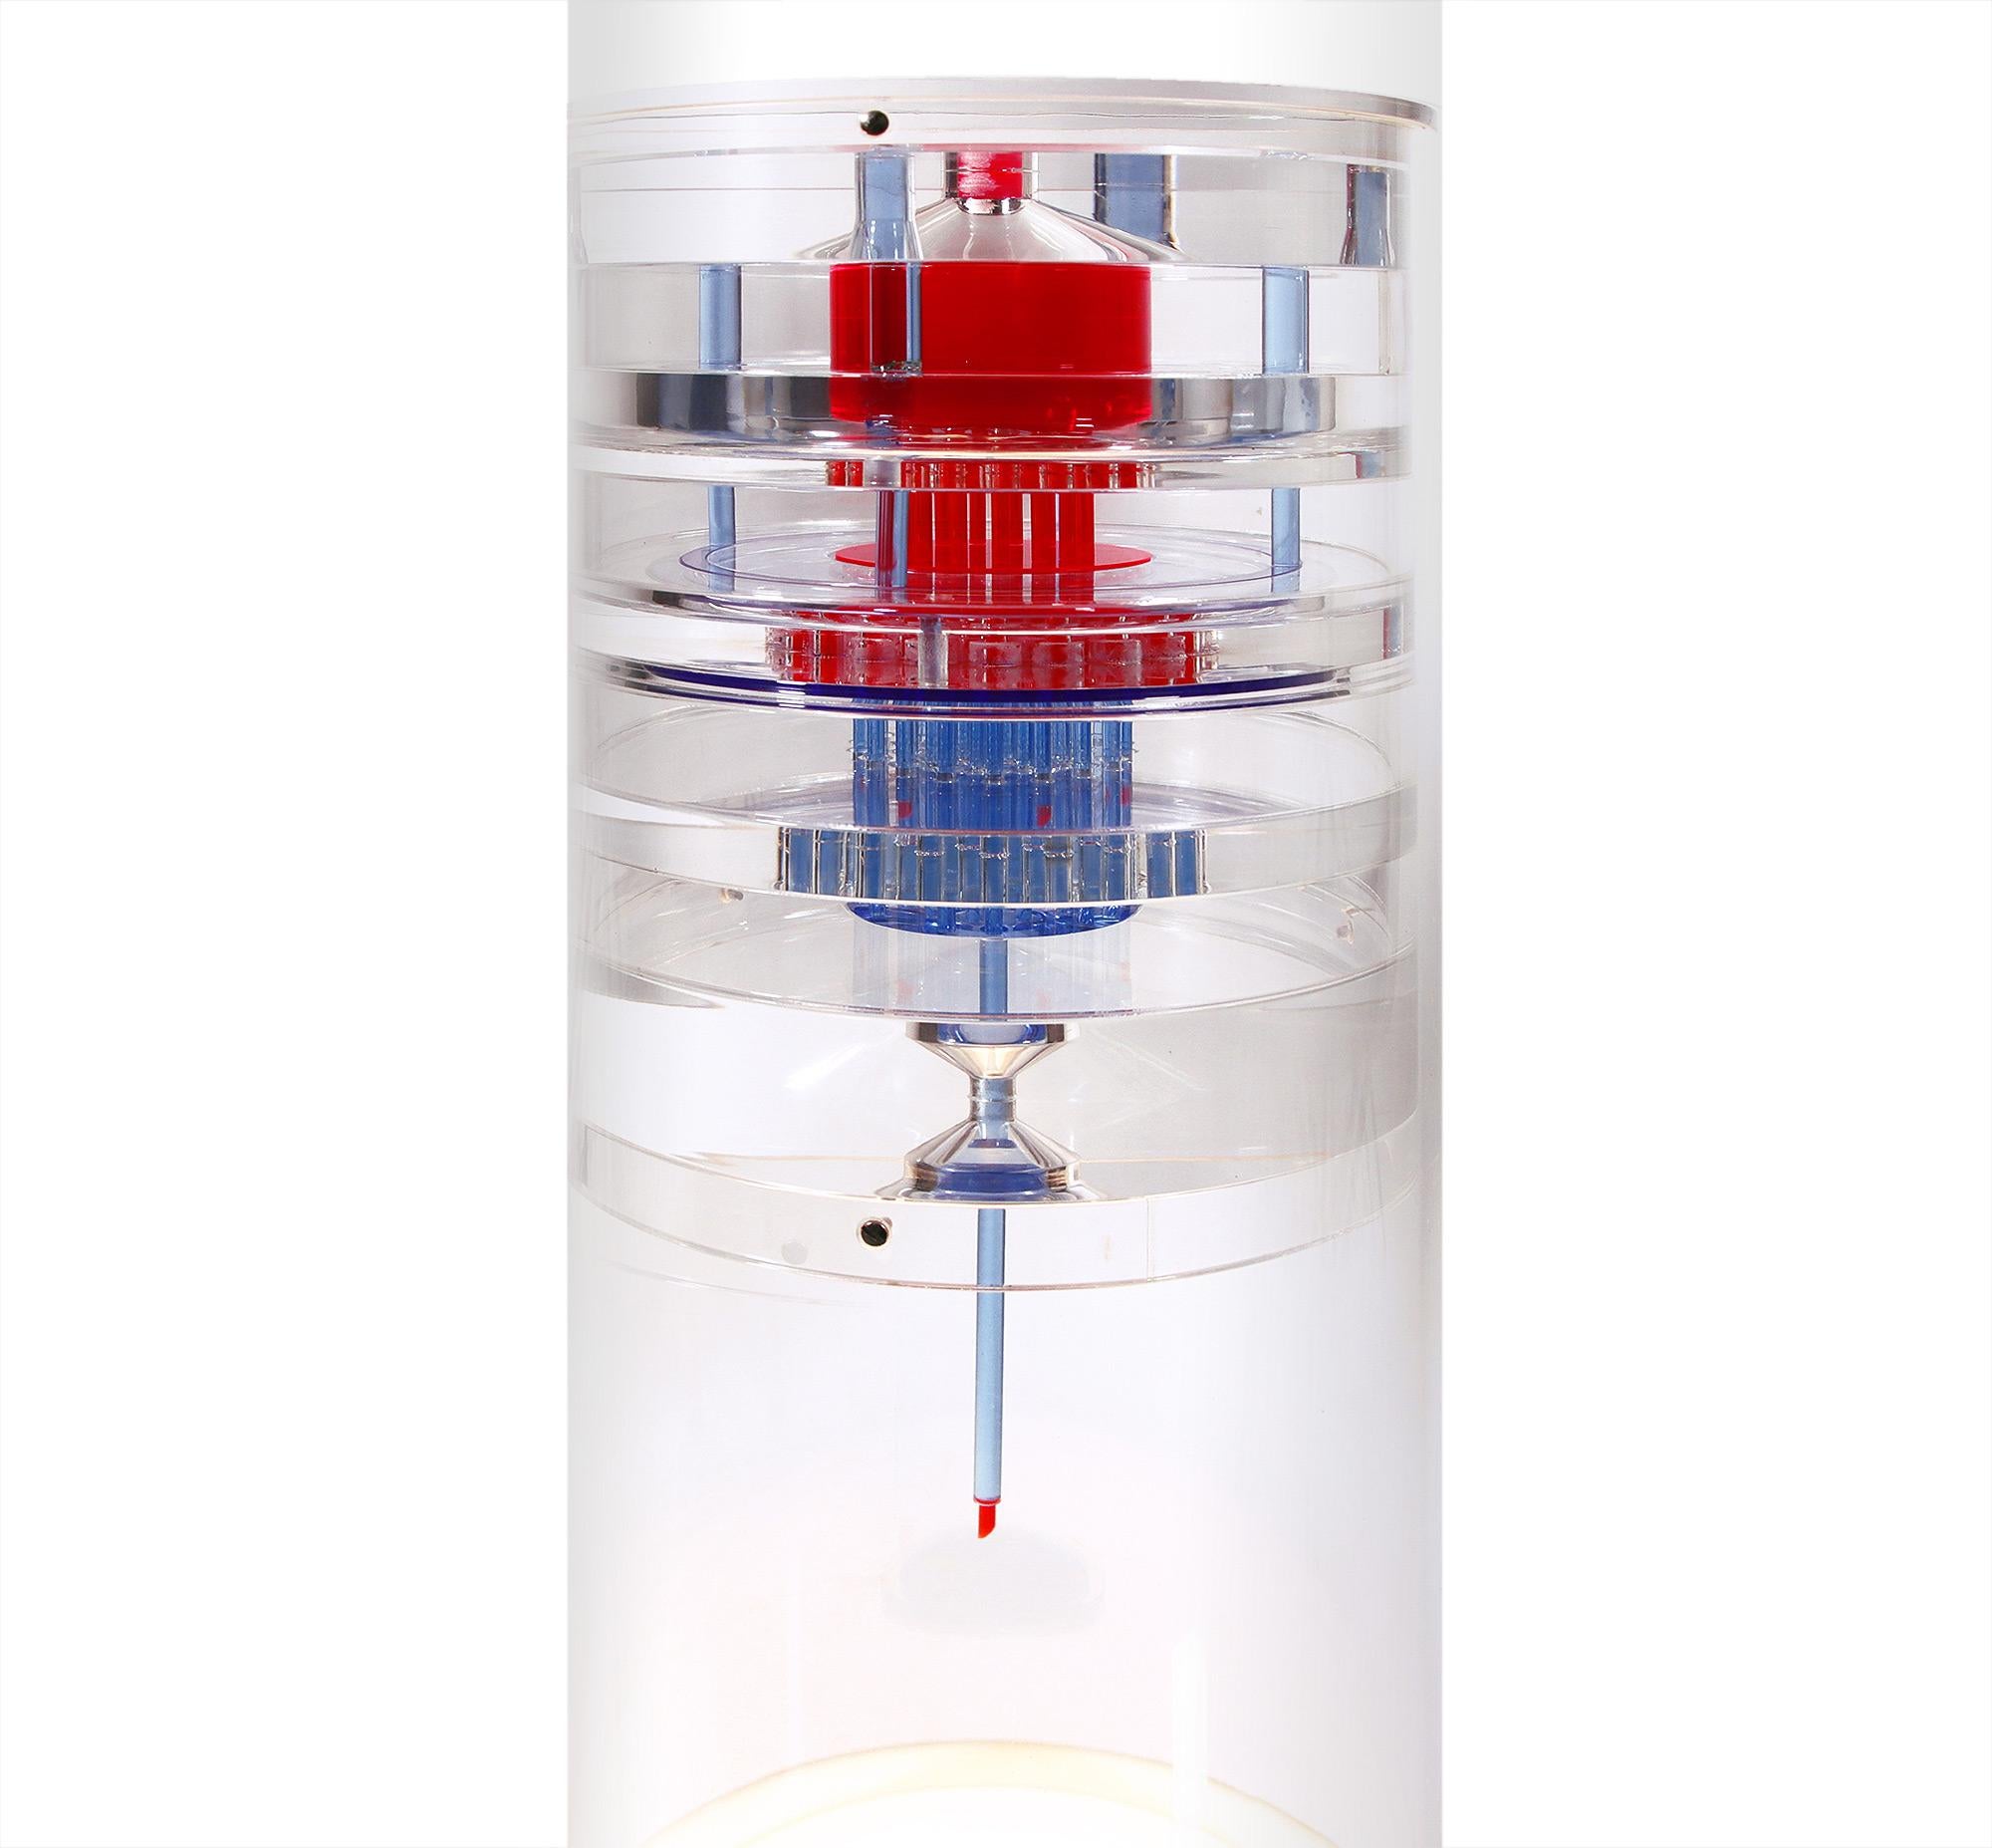 Unique piece made of a thick plexiglass column with red and blue elements inside, a metal base and illuminated from below with a circular fluorescent tube.
The object is probably an exhibition piece and shows a model of a turbine, engine,